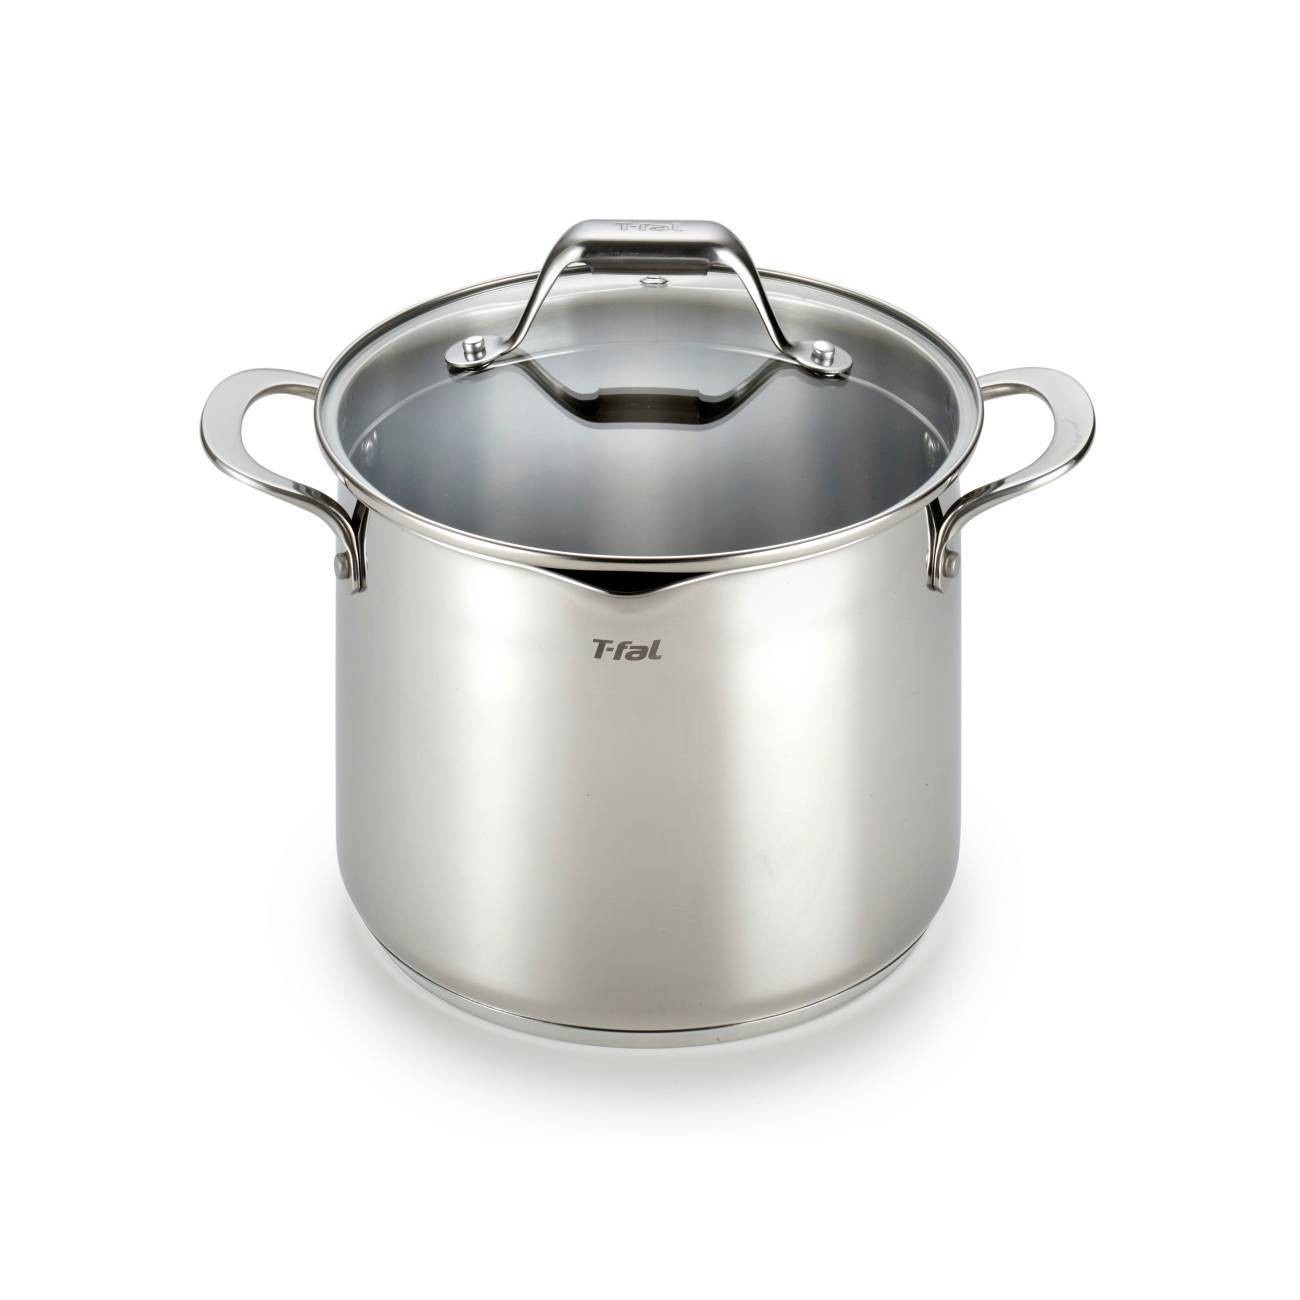 slide 1 of 4, T-fal Simply Cook Stainless Steel Cookware, 6qt Stockpot with Lid, Silver, 6 qt